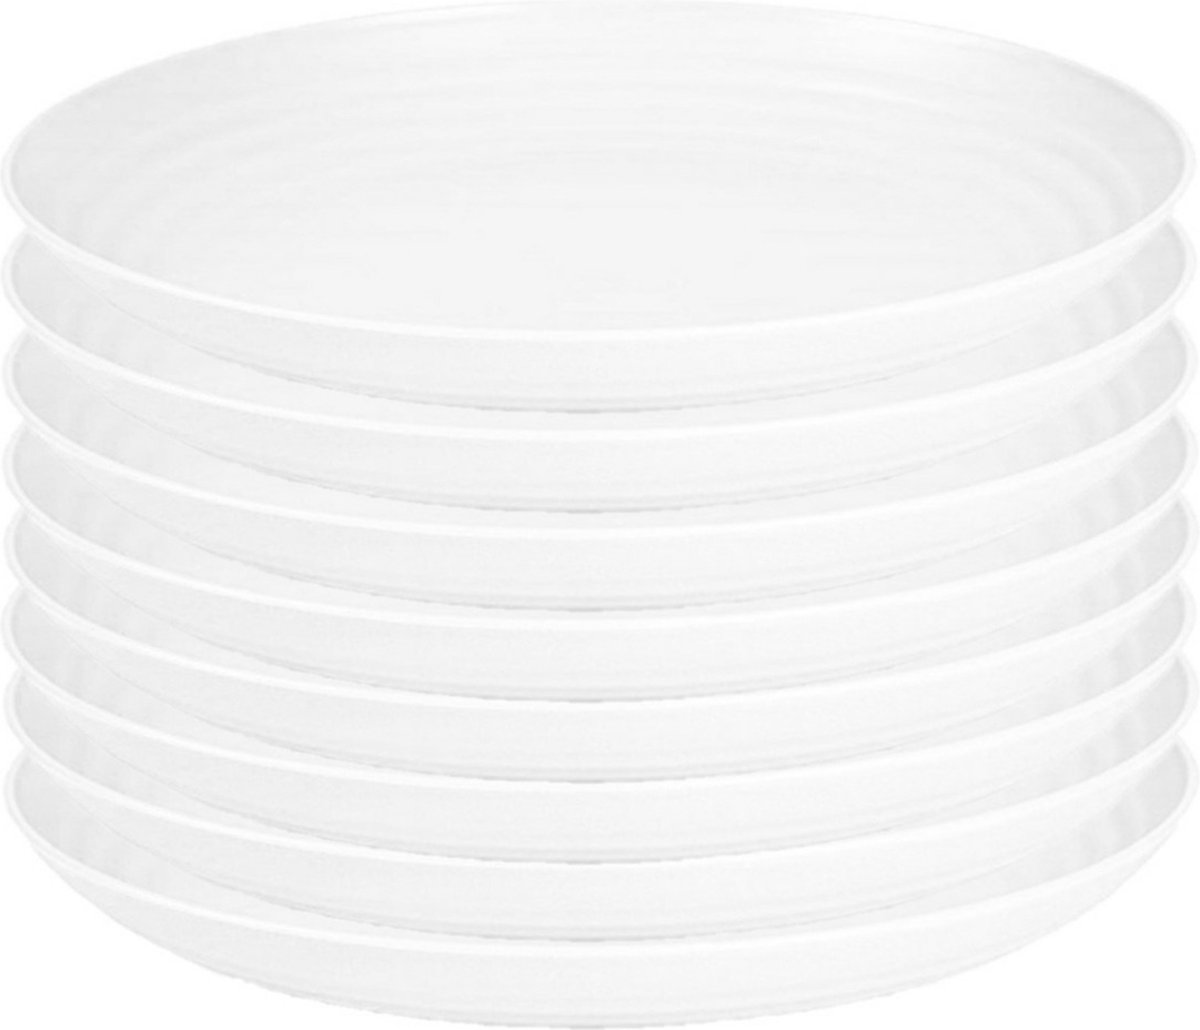 PlasticForte Rond bord/camping bord - 8x - D22 cm - ivoor wit - kunststof